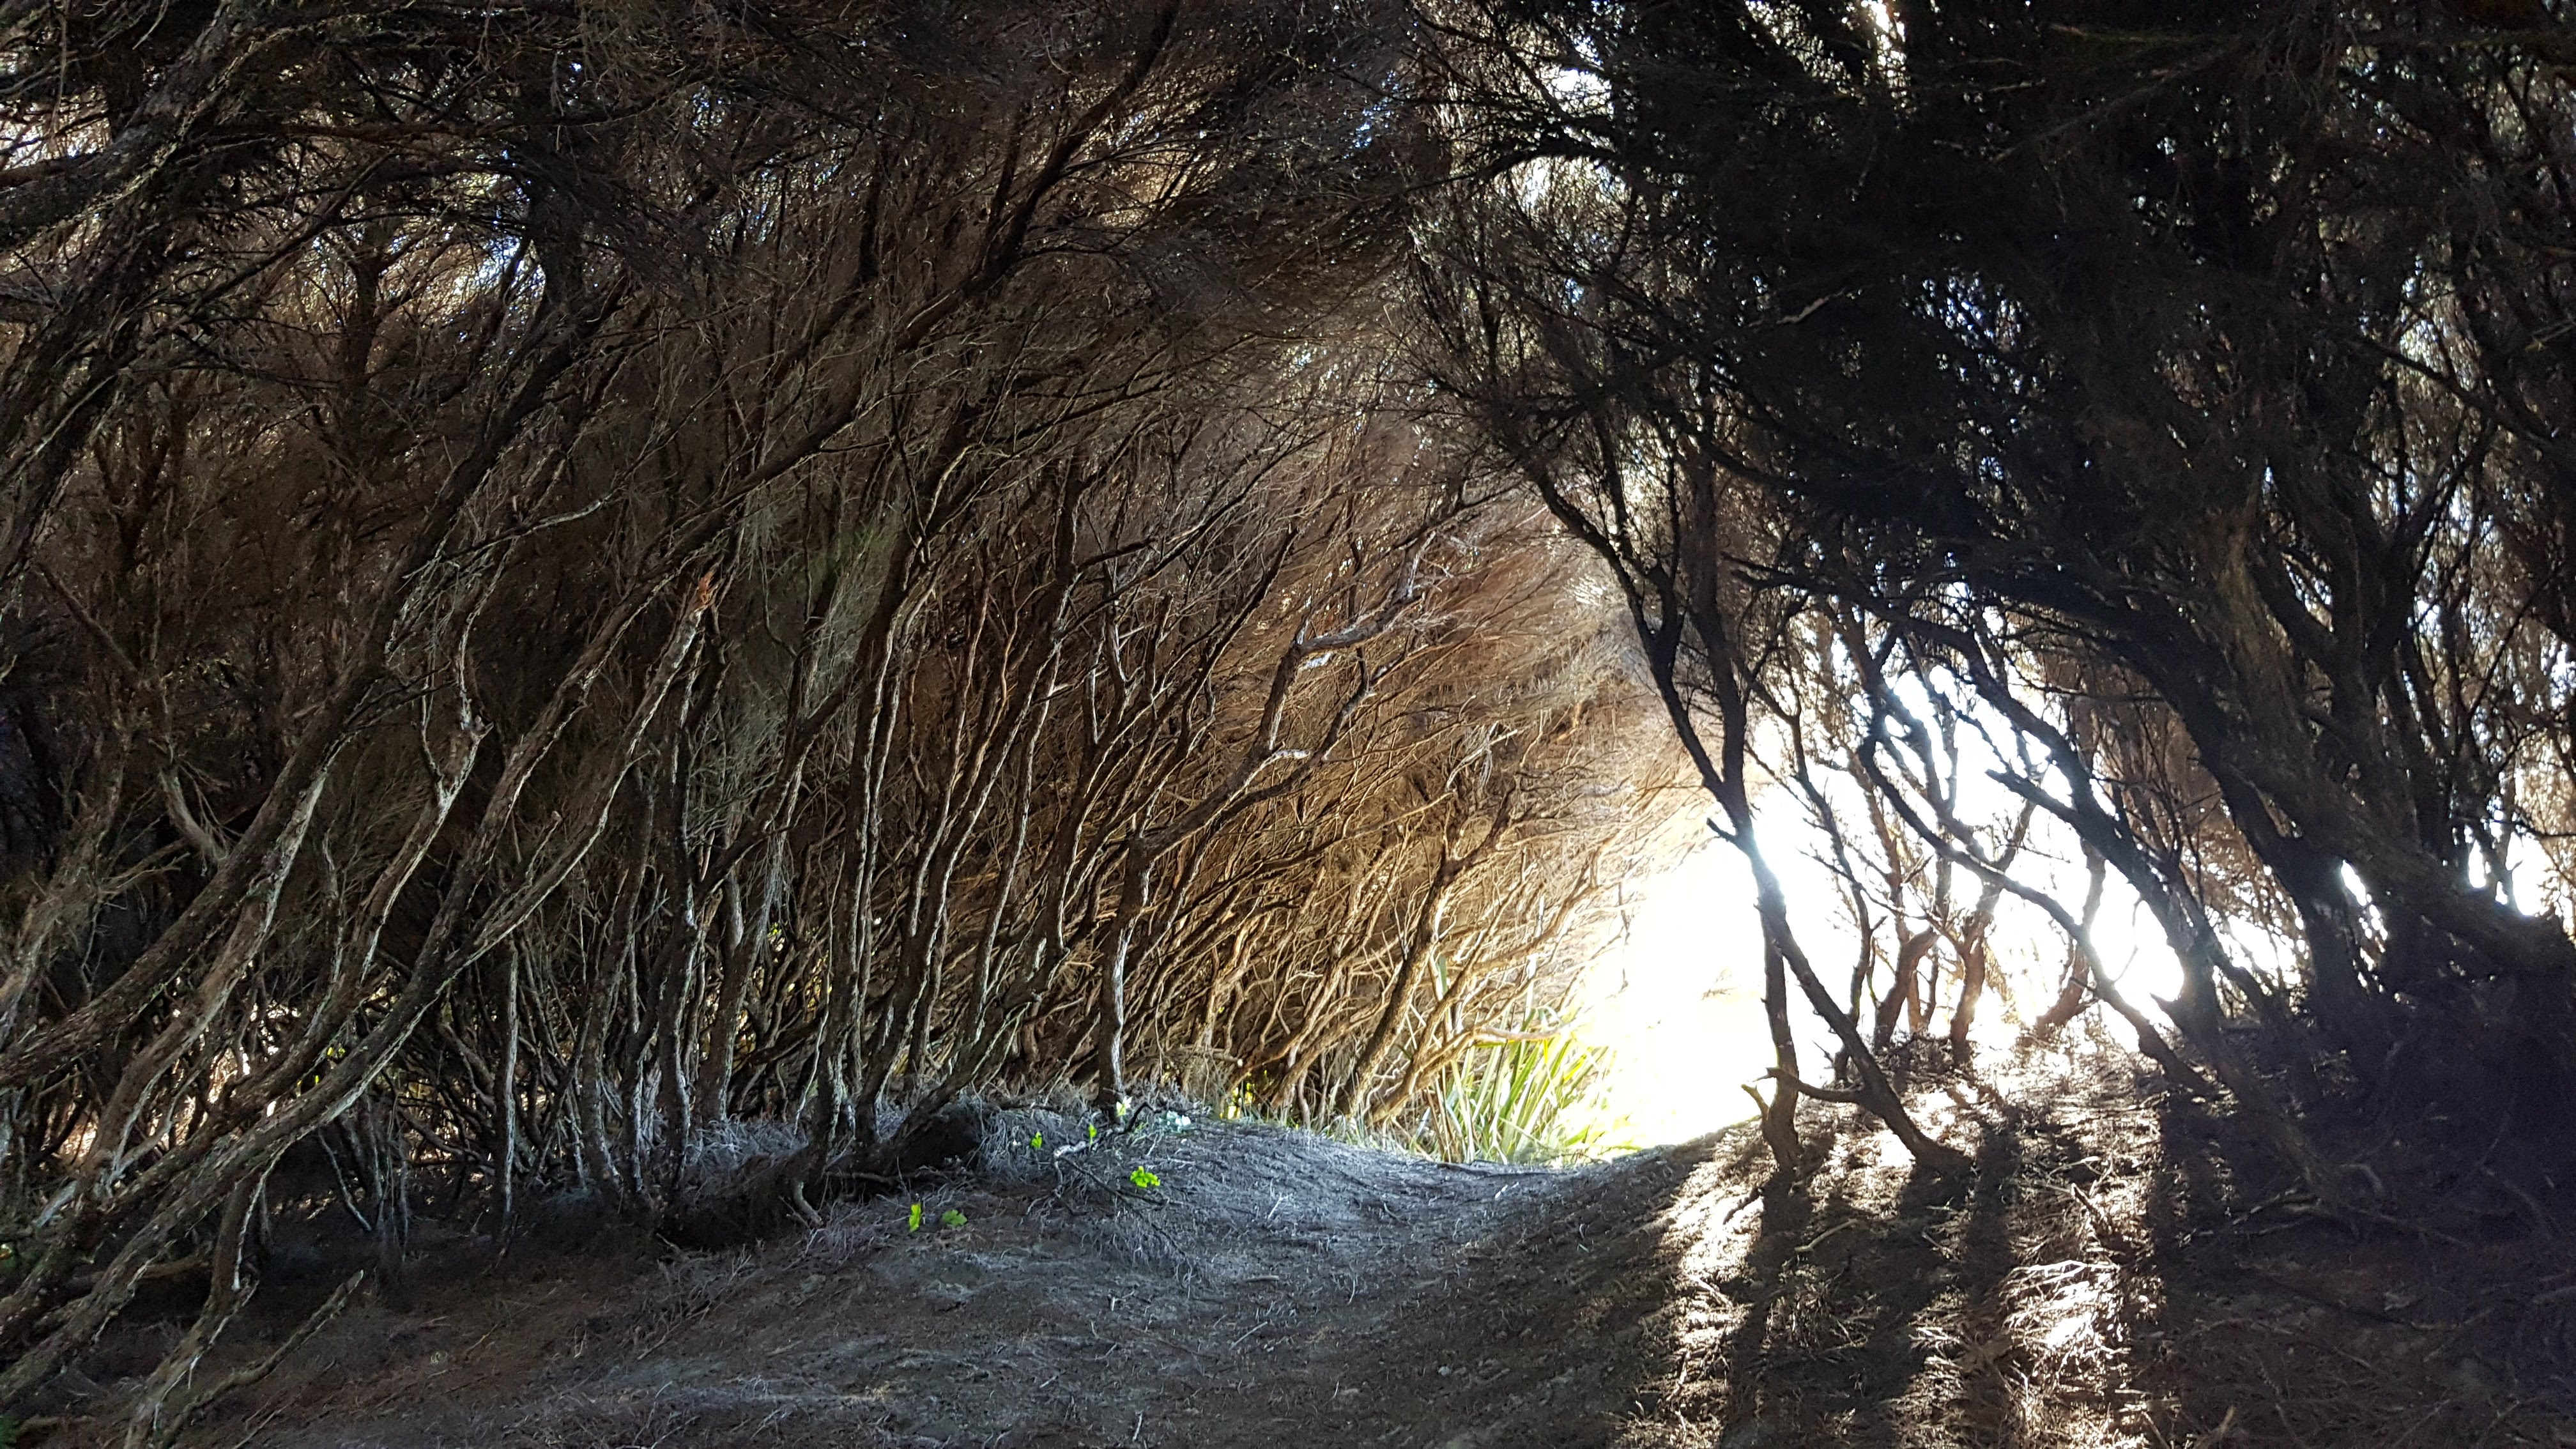 At the end of the tunnel - Almost at Wharariki Beach